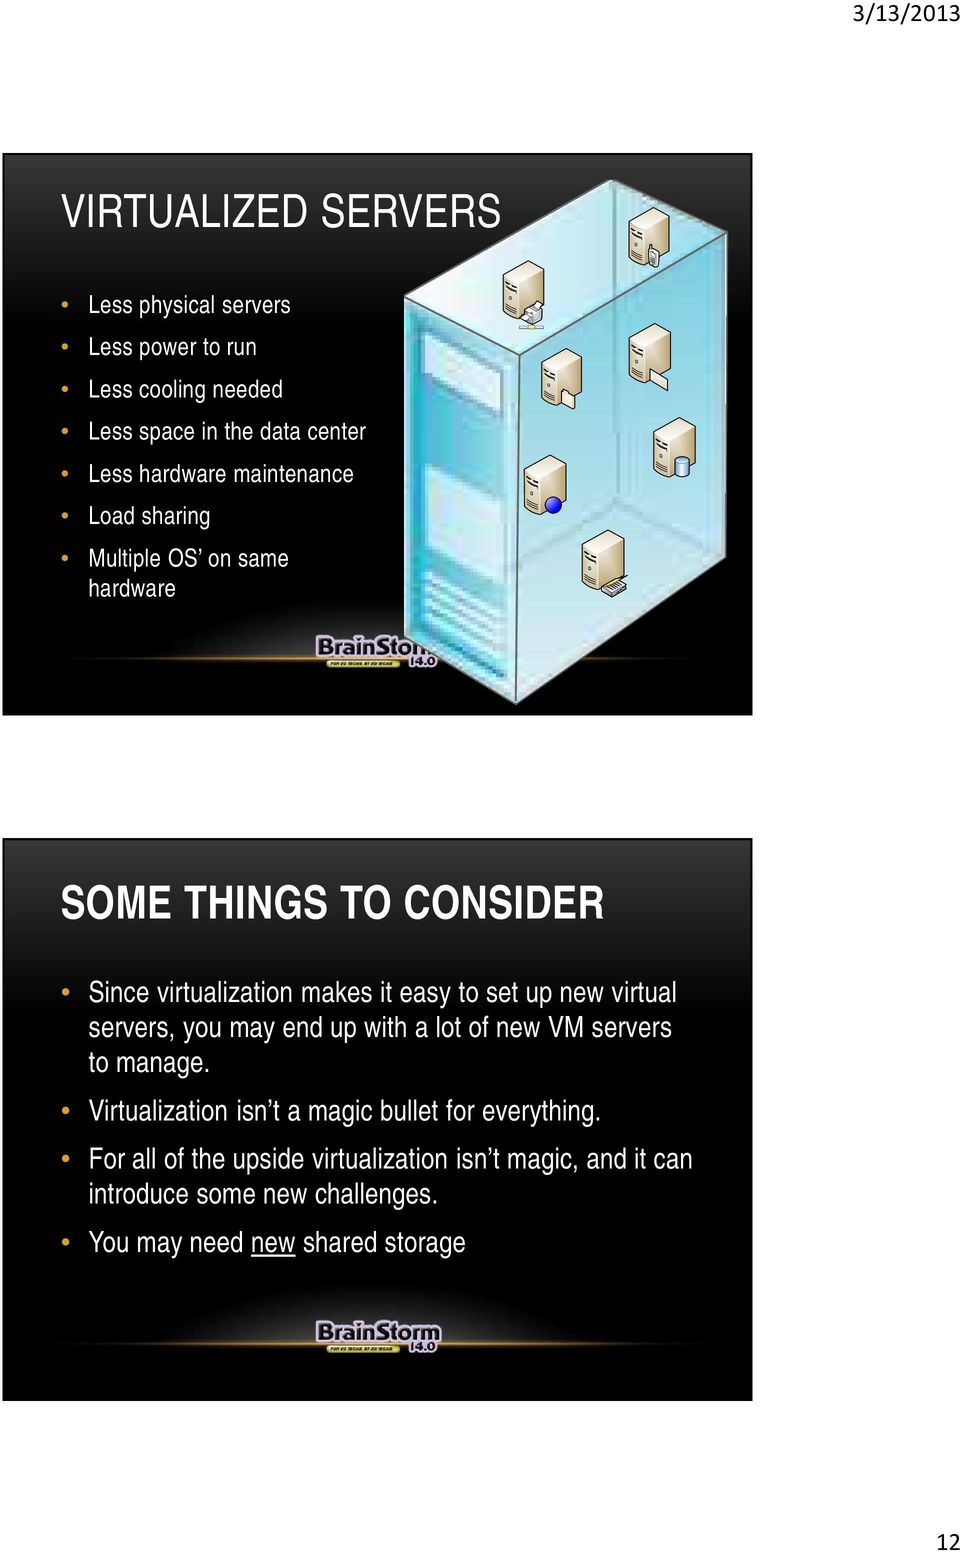 new virtual servers, you may end up with a lot of new VM servers to manage.